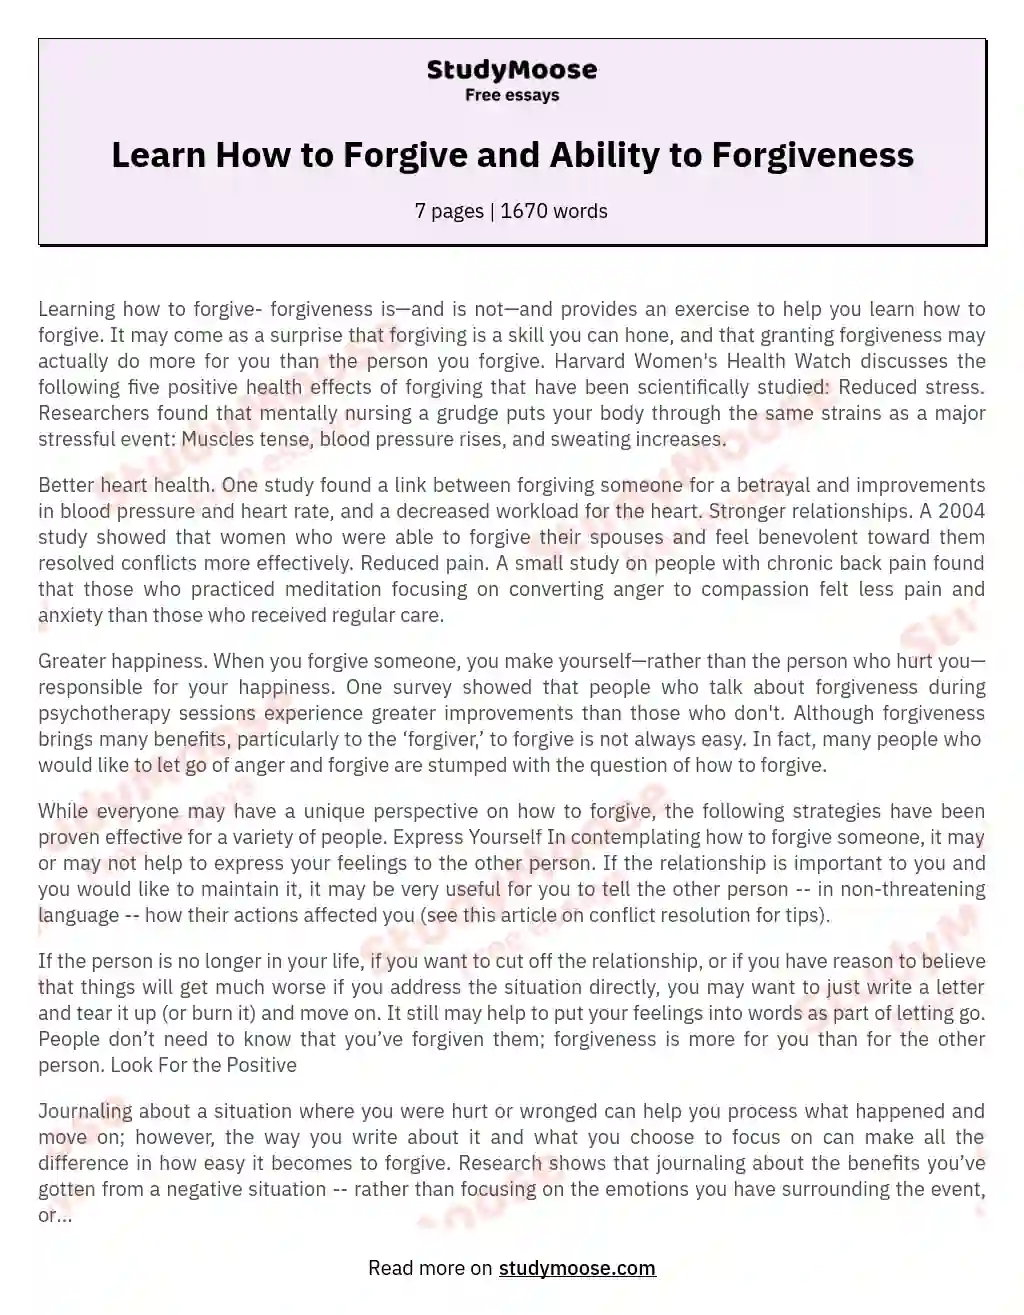 Learn How to Forgive and Ability to Forgiveness